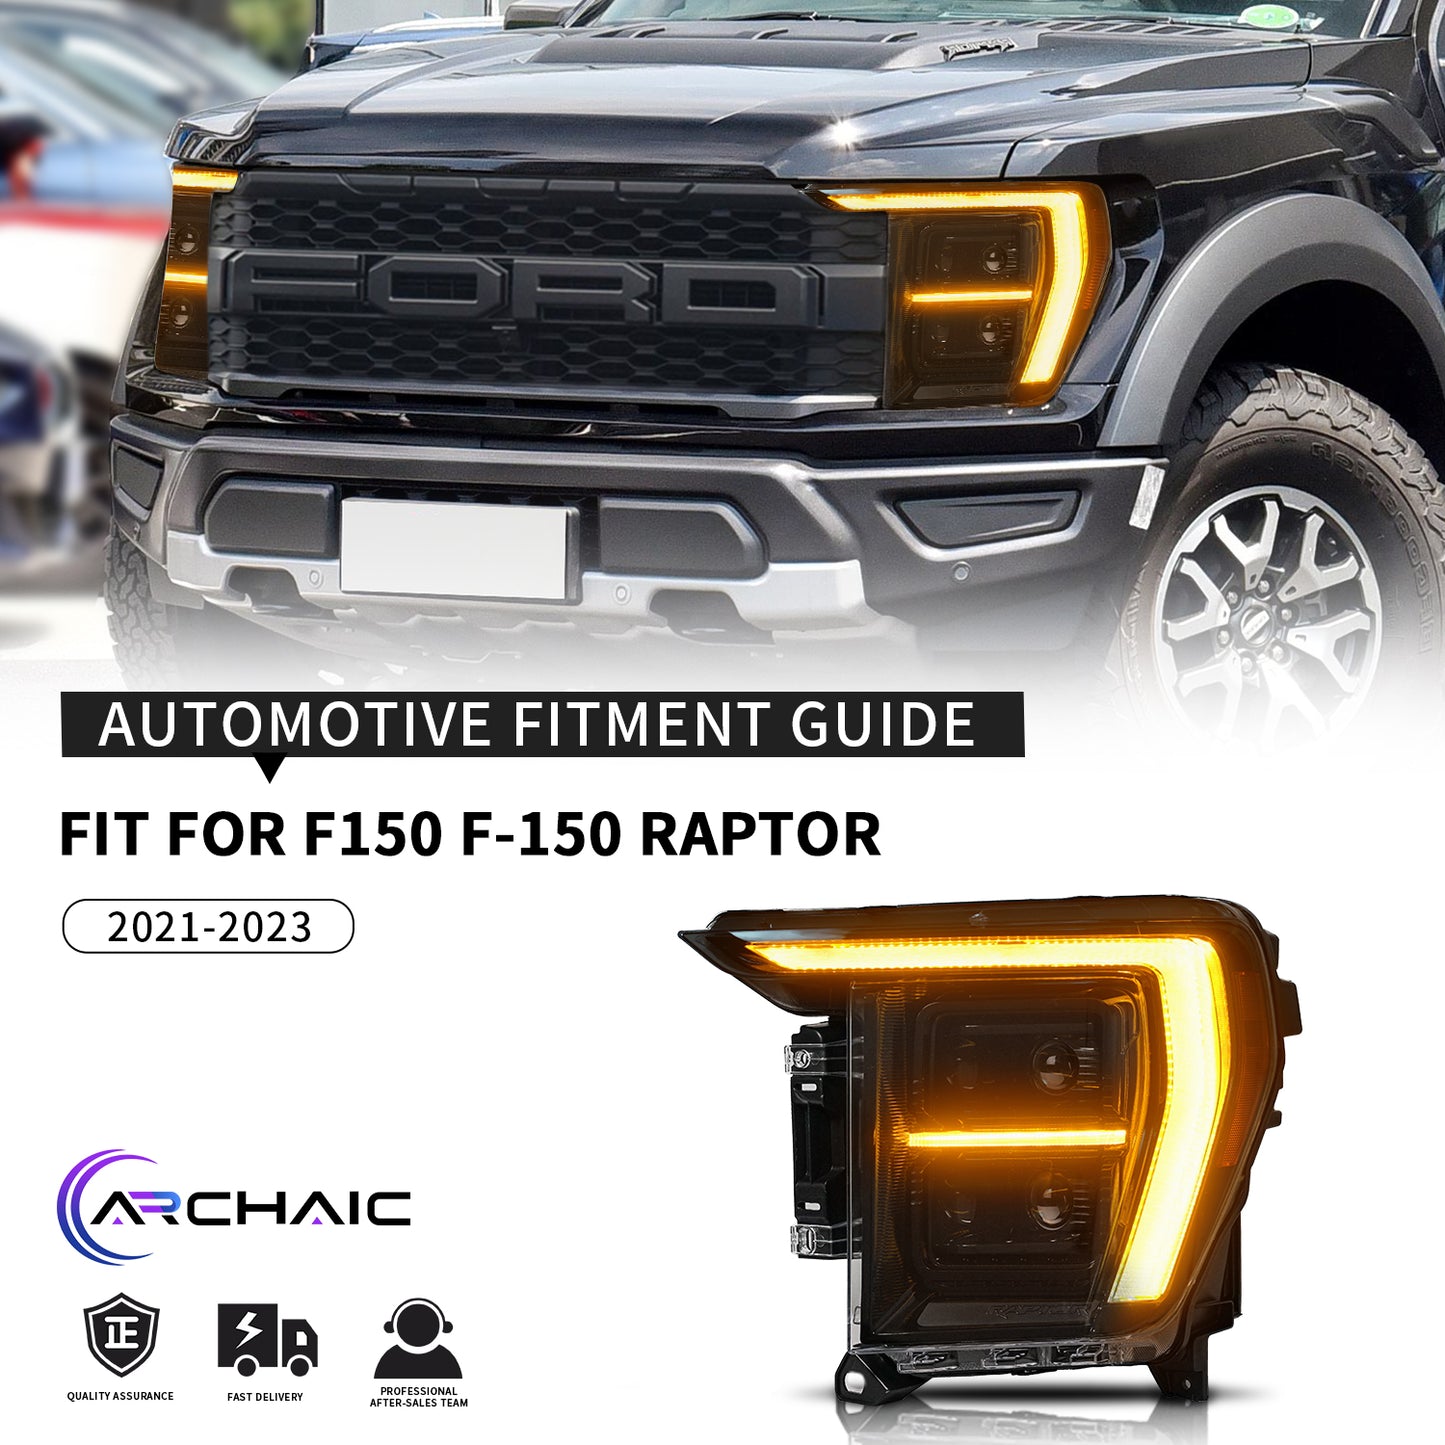 Full LED Headlights Assembly For Ford F-150 Raptor 2021+, F DRL Style